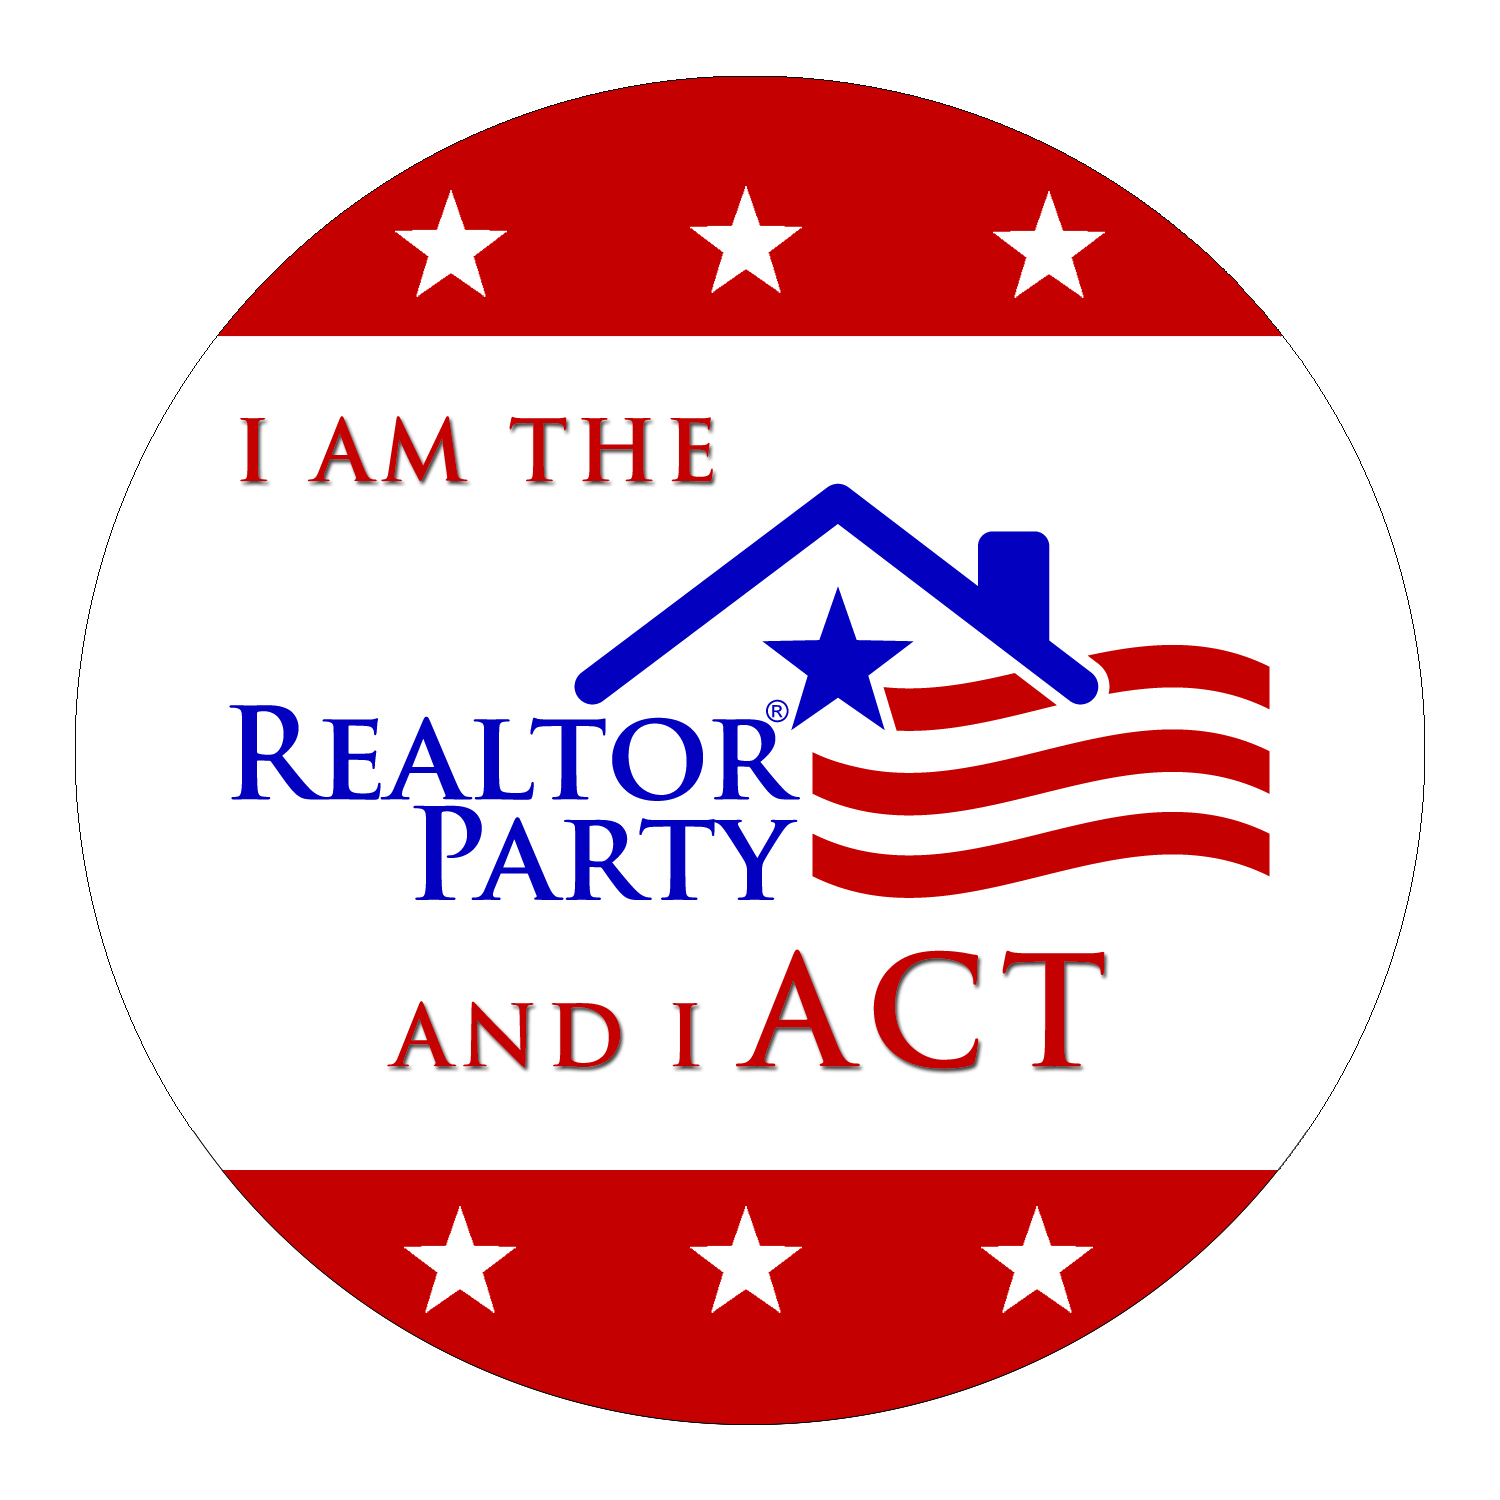 UPDATE: NAR Calls for Action Need Our Attention